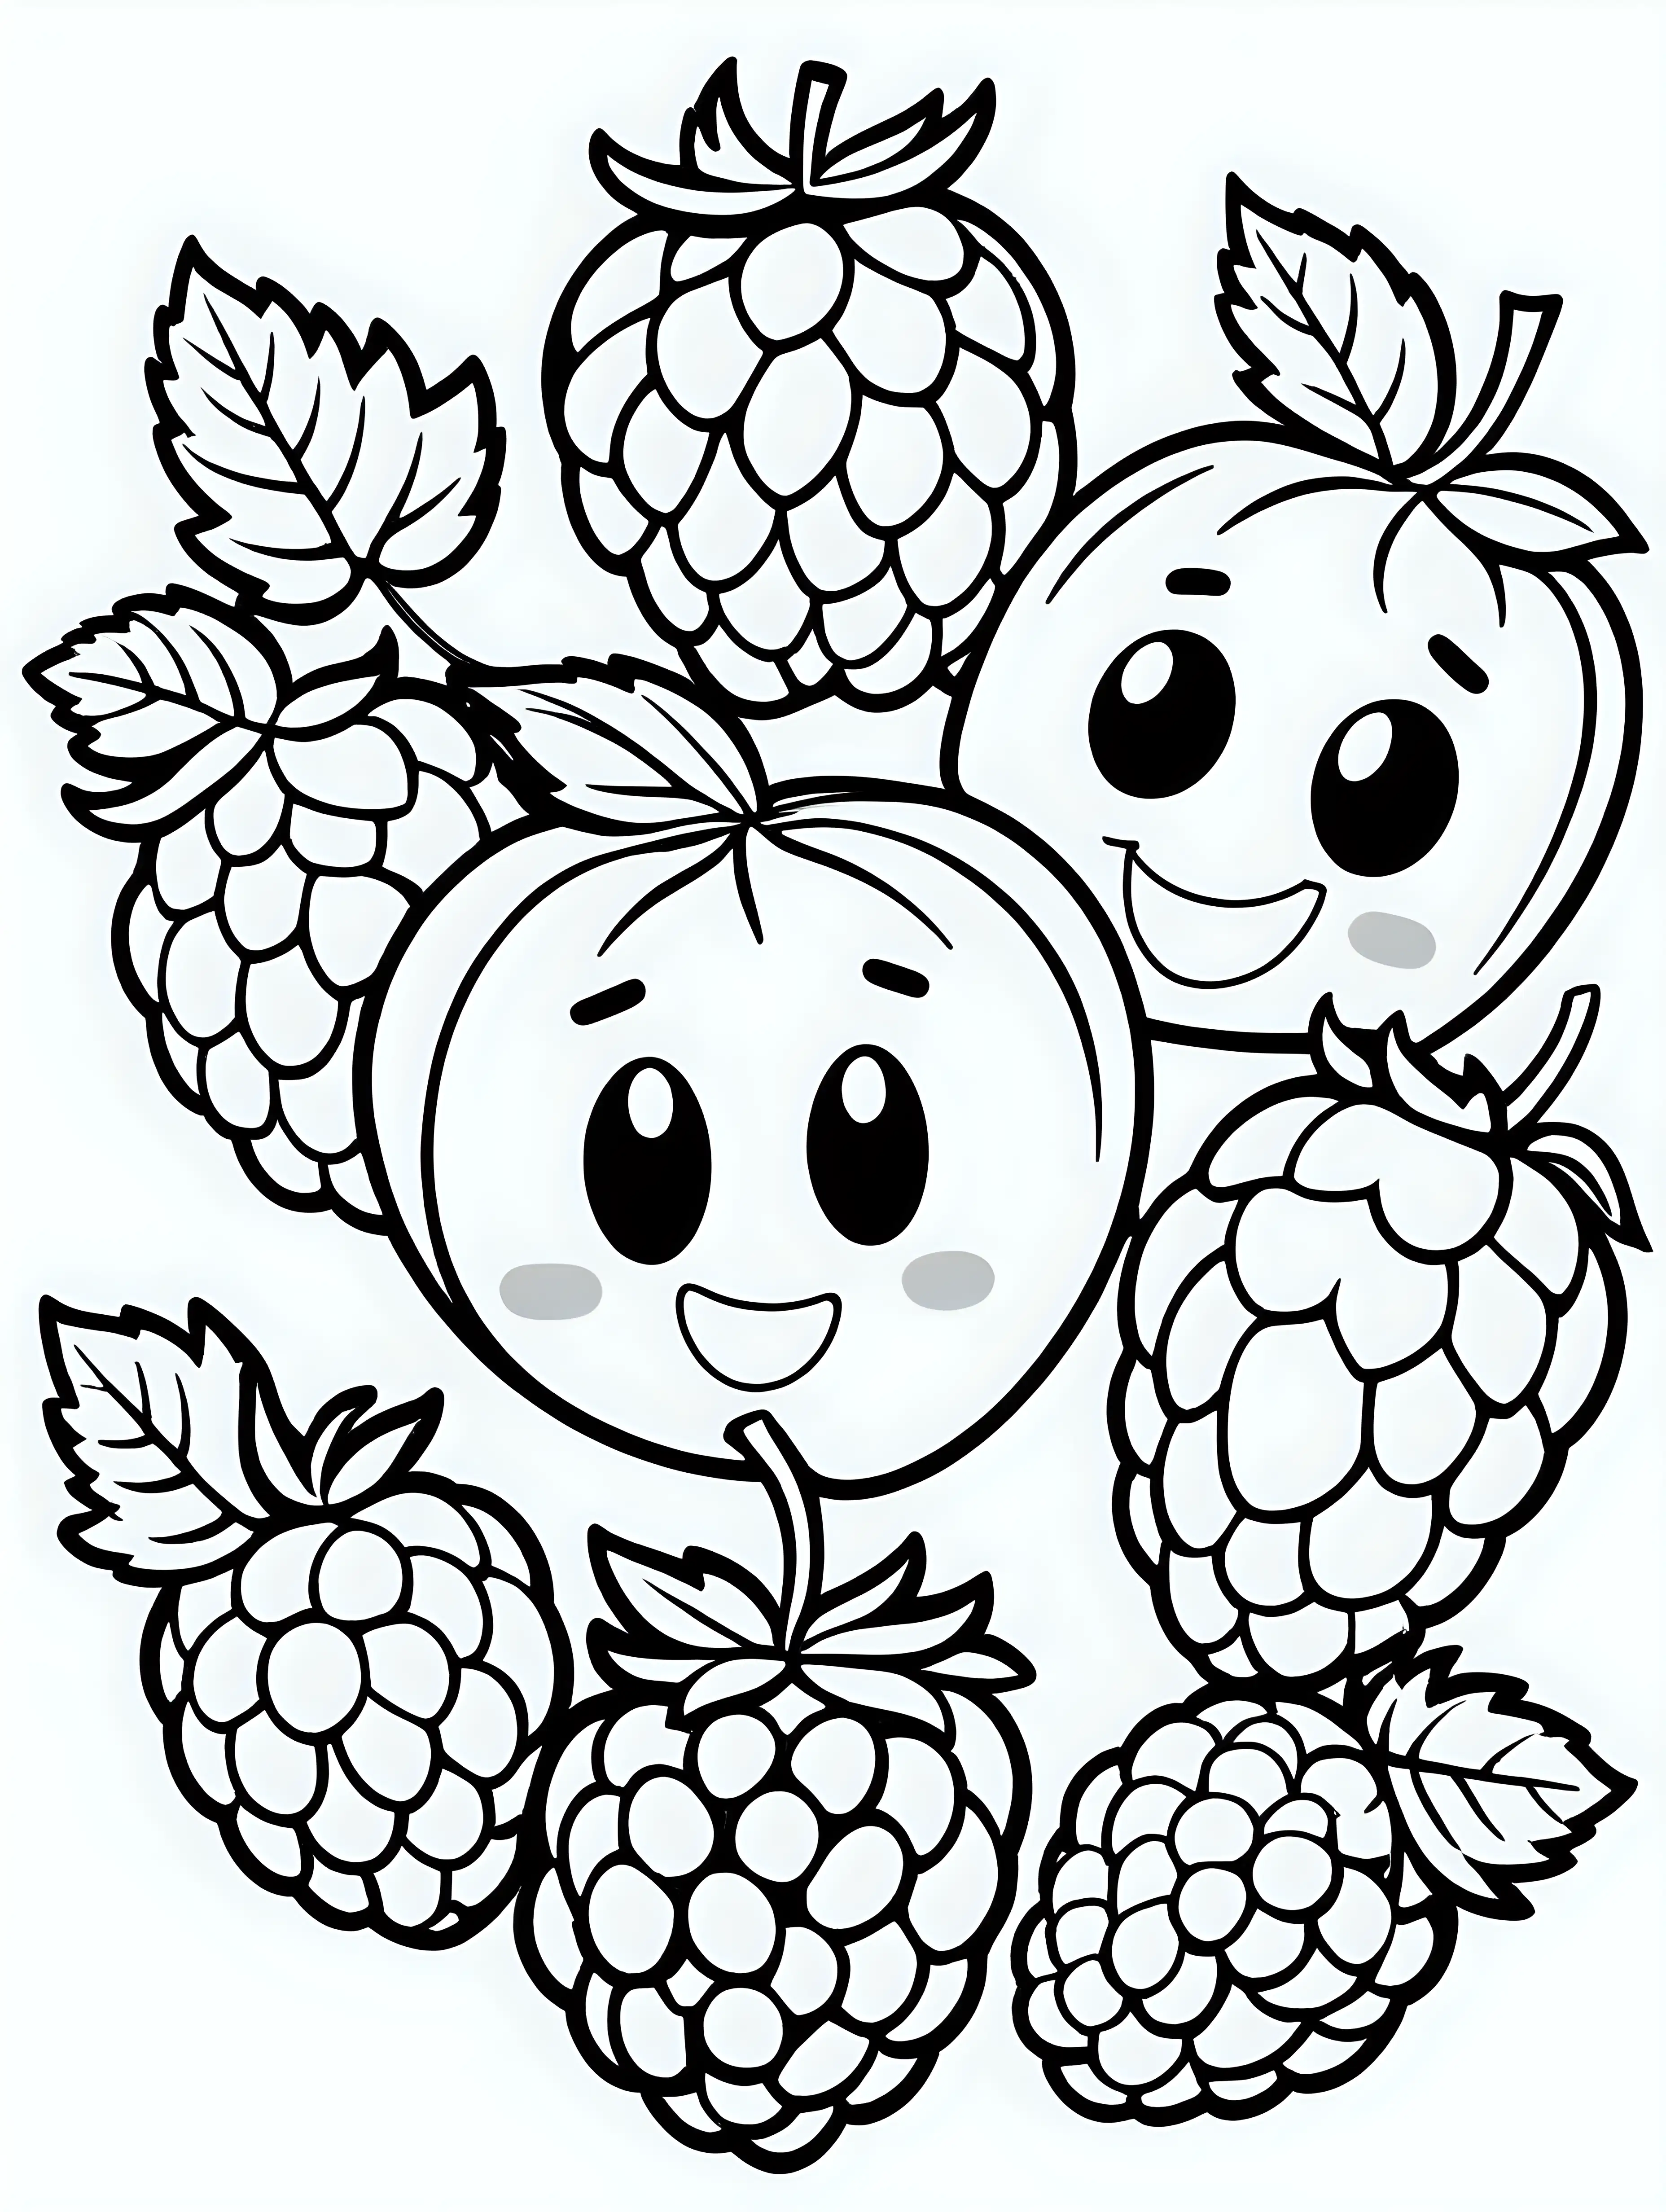 coloring book, cartoon drawing, clean black and white, single line, white background, cute large raspberries, emojis